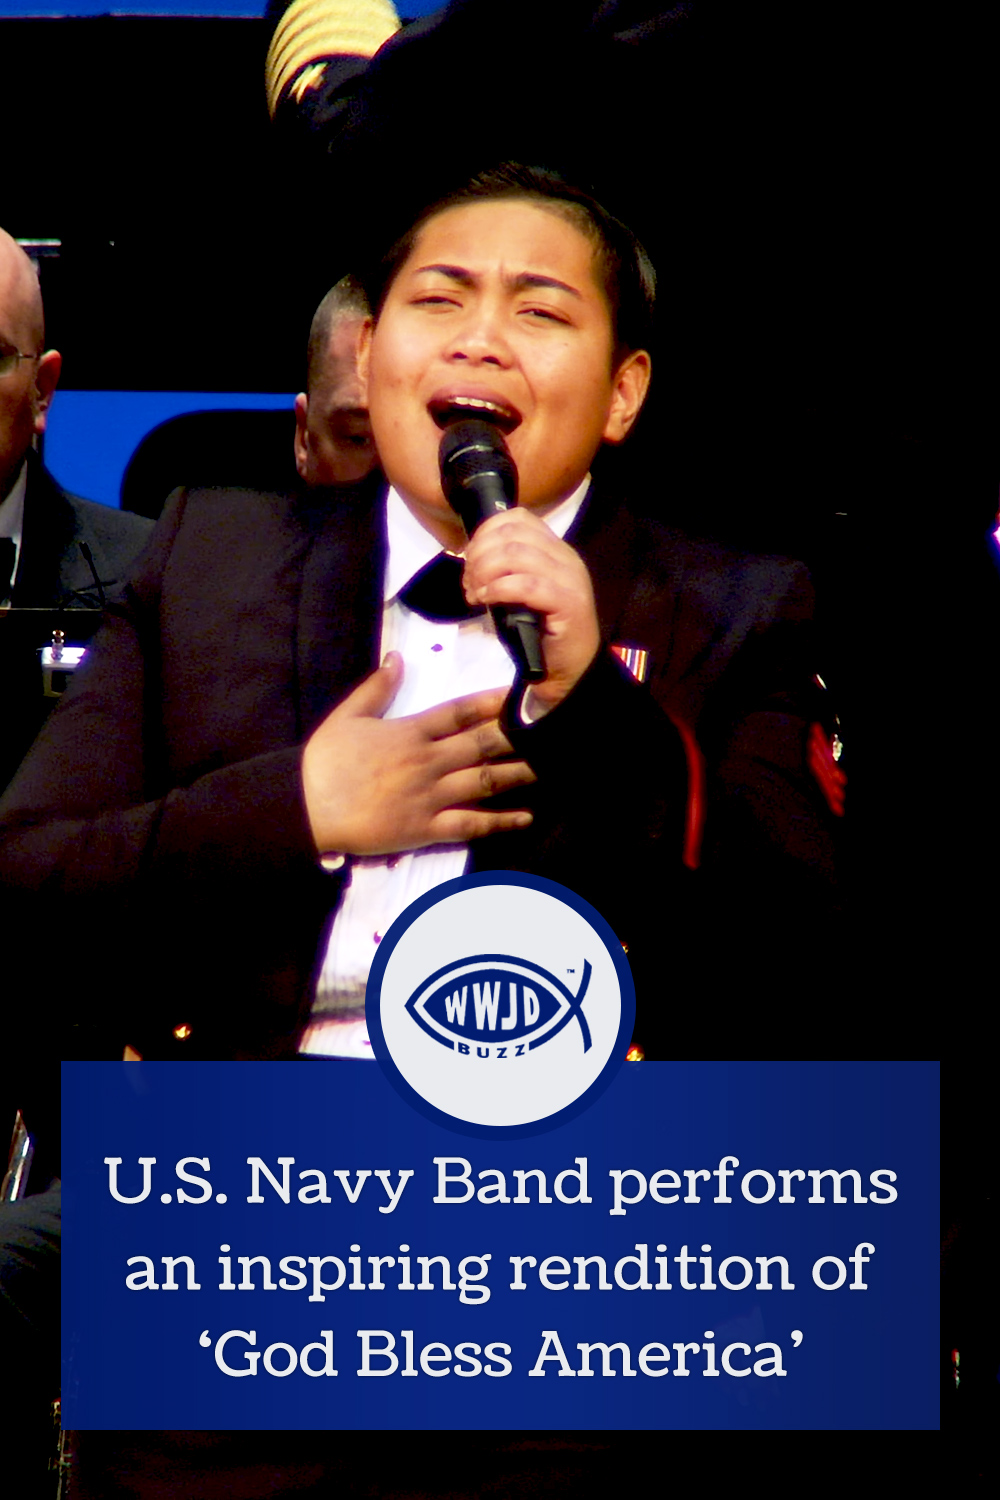 U.S. Navy Band performs an inspiring rendition of ‘God Bless America’